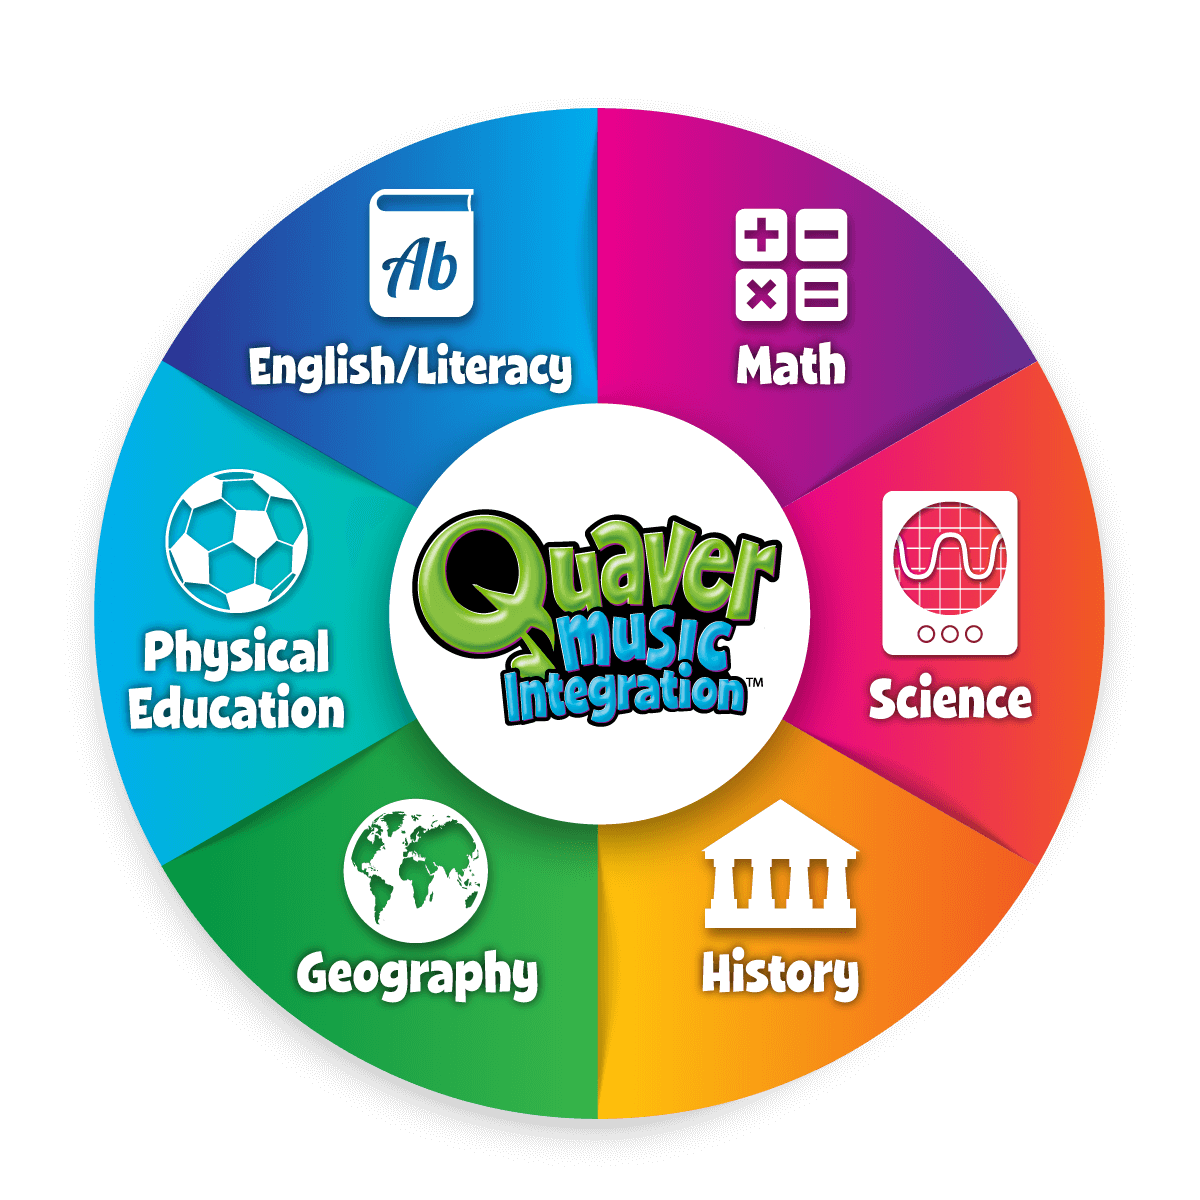 Quaver Music Integration Wheel showing how Quaver Music Integration connects music to all the core subjects such as history, math, english, PE, geography, and history.